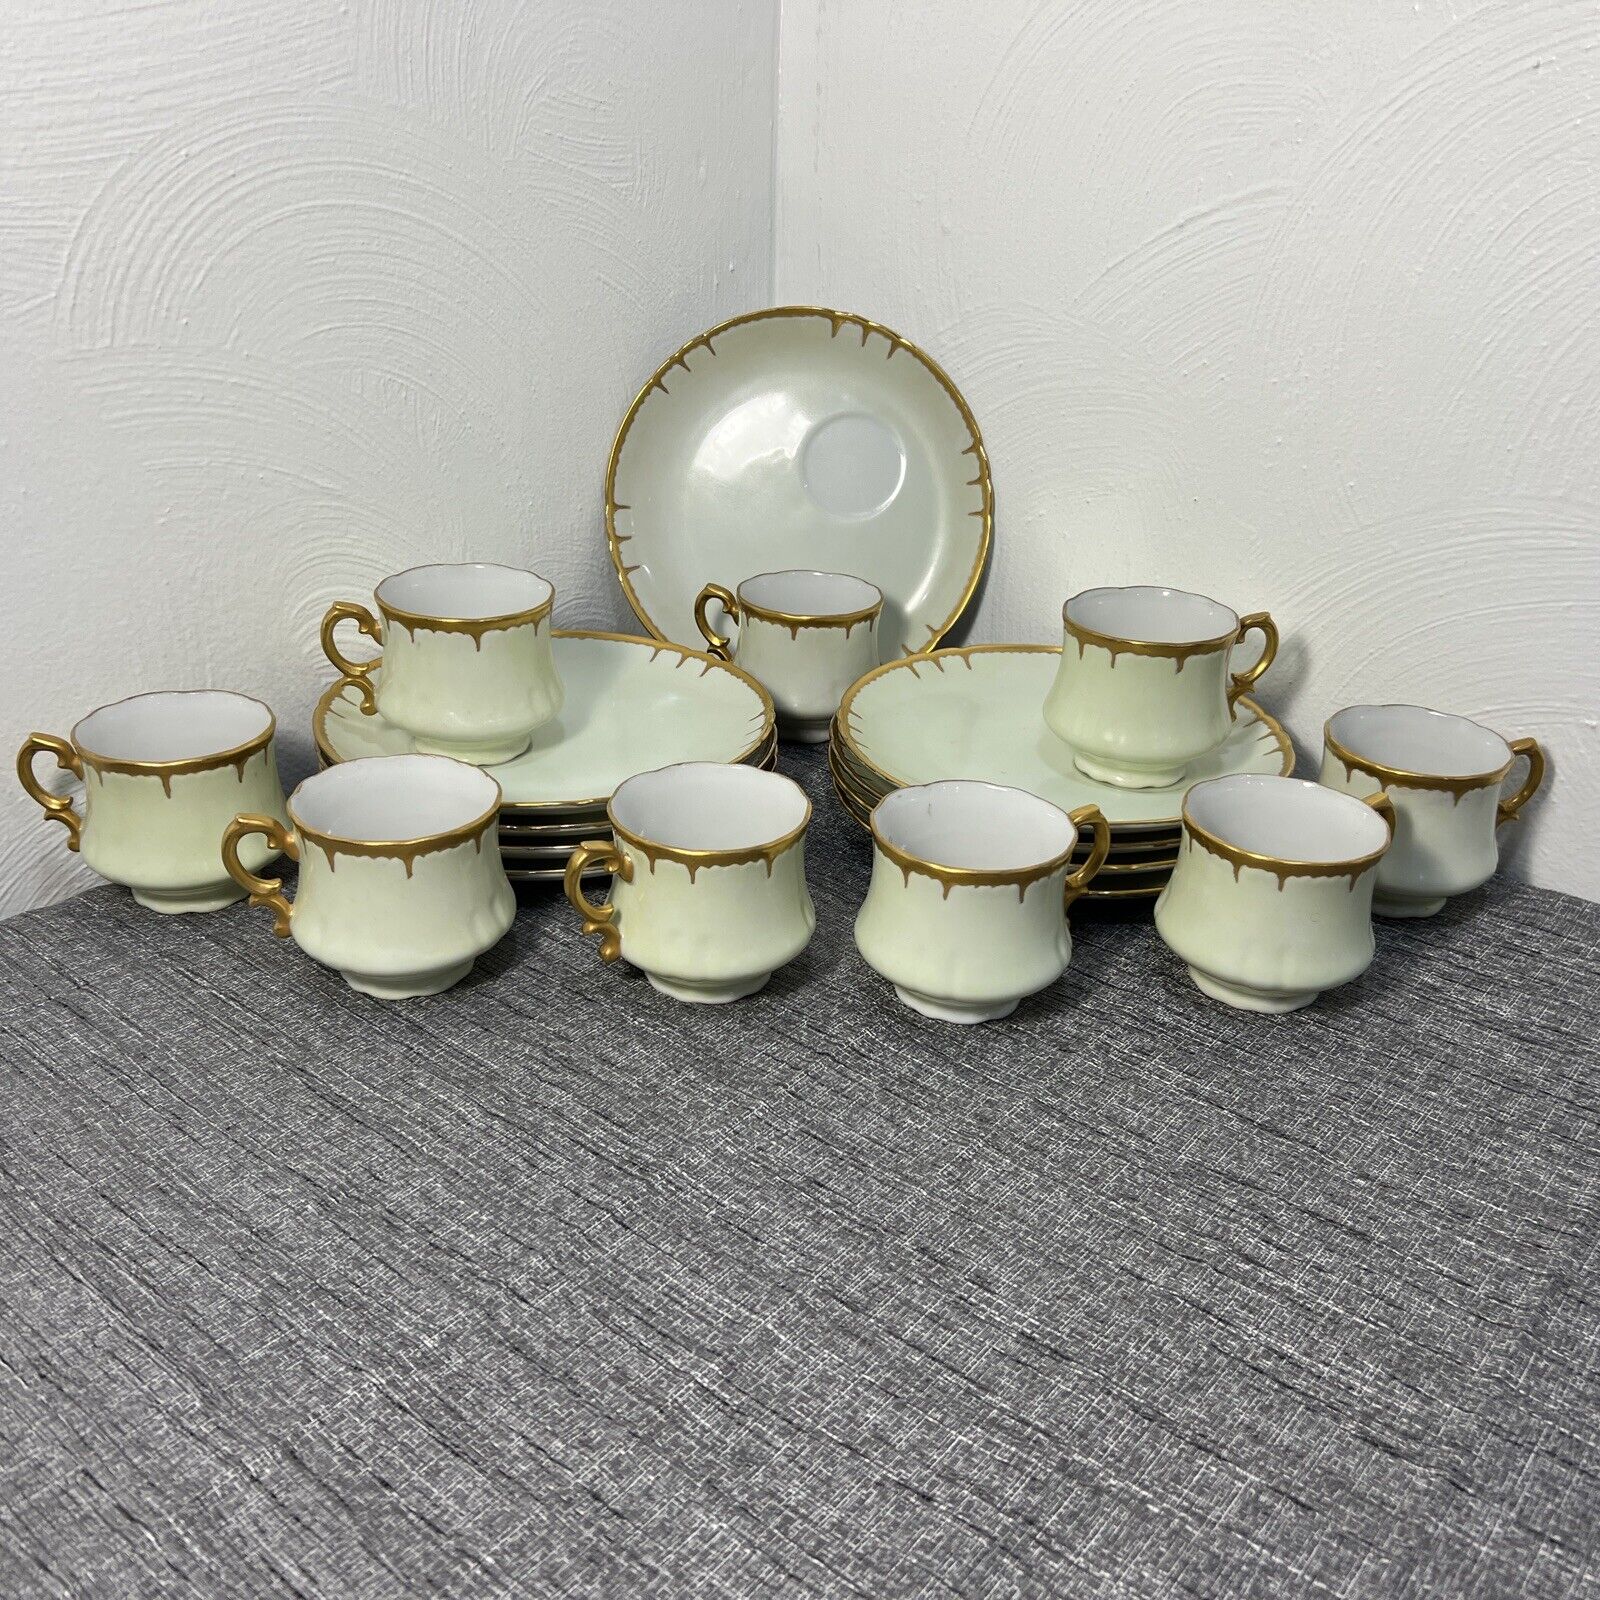 Vintage 18 Piece Snack/Luncheon Tray Sets -  1960’s